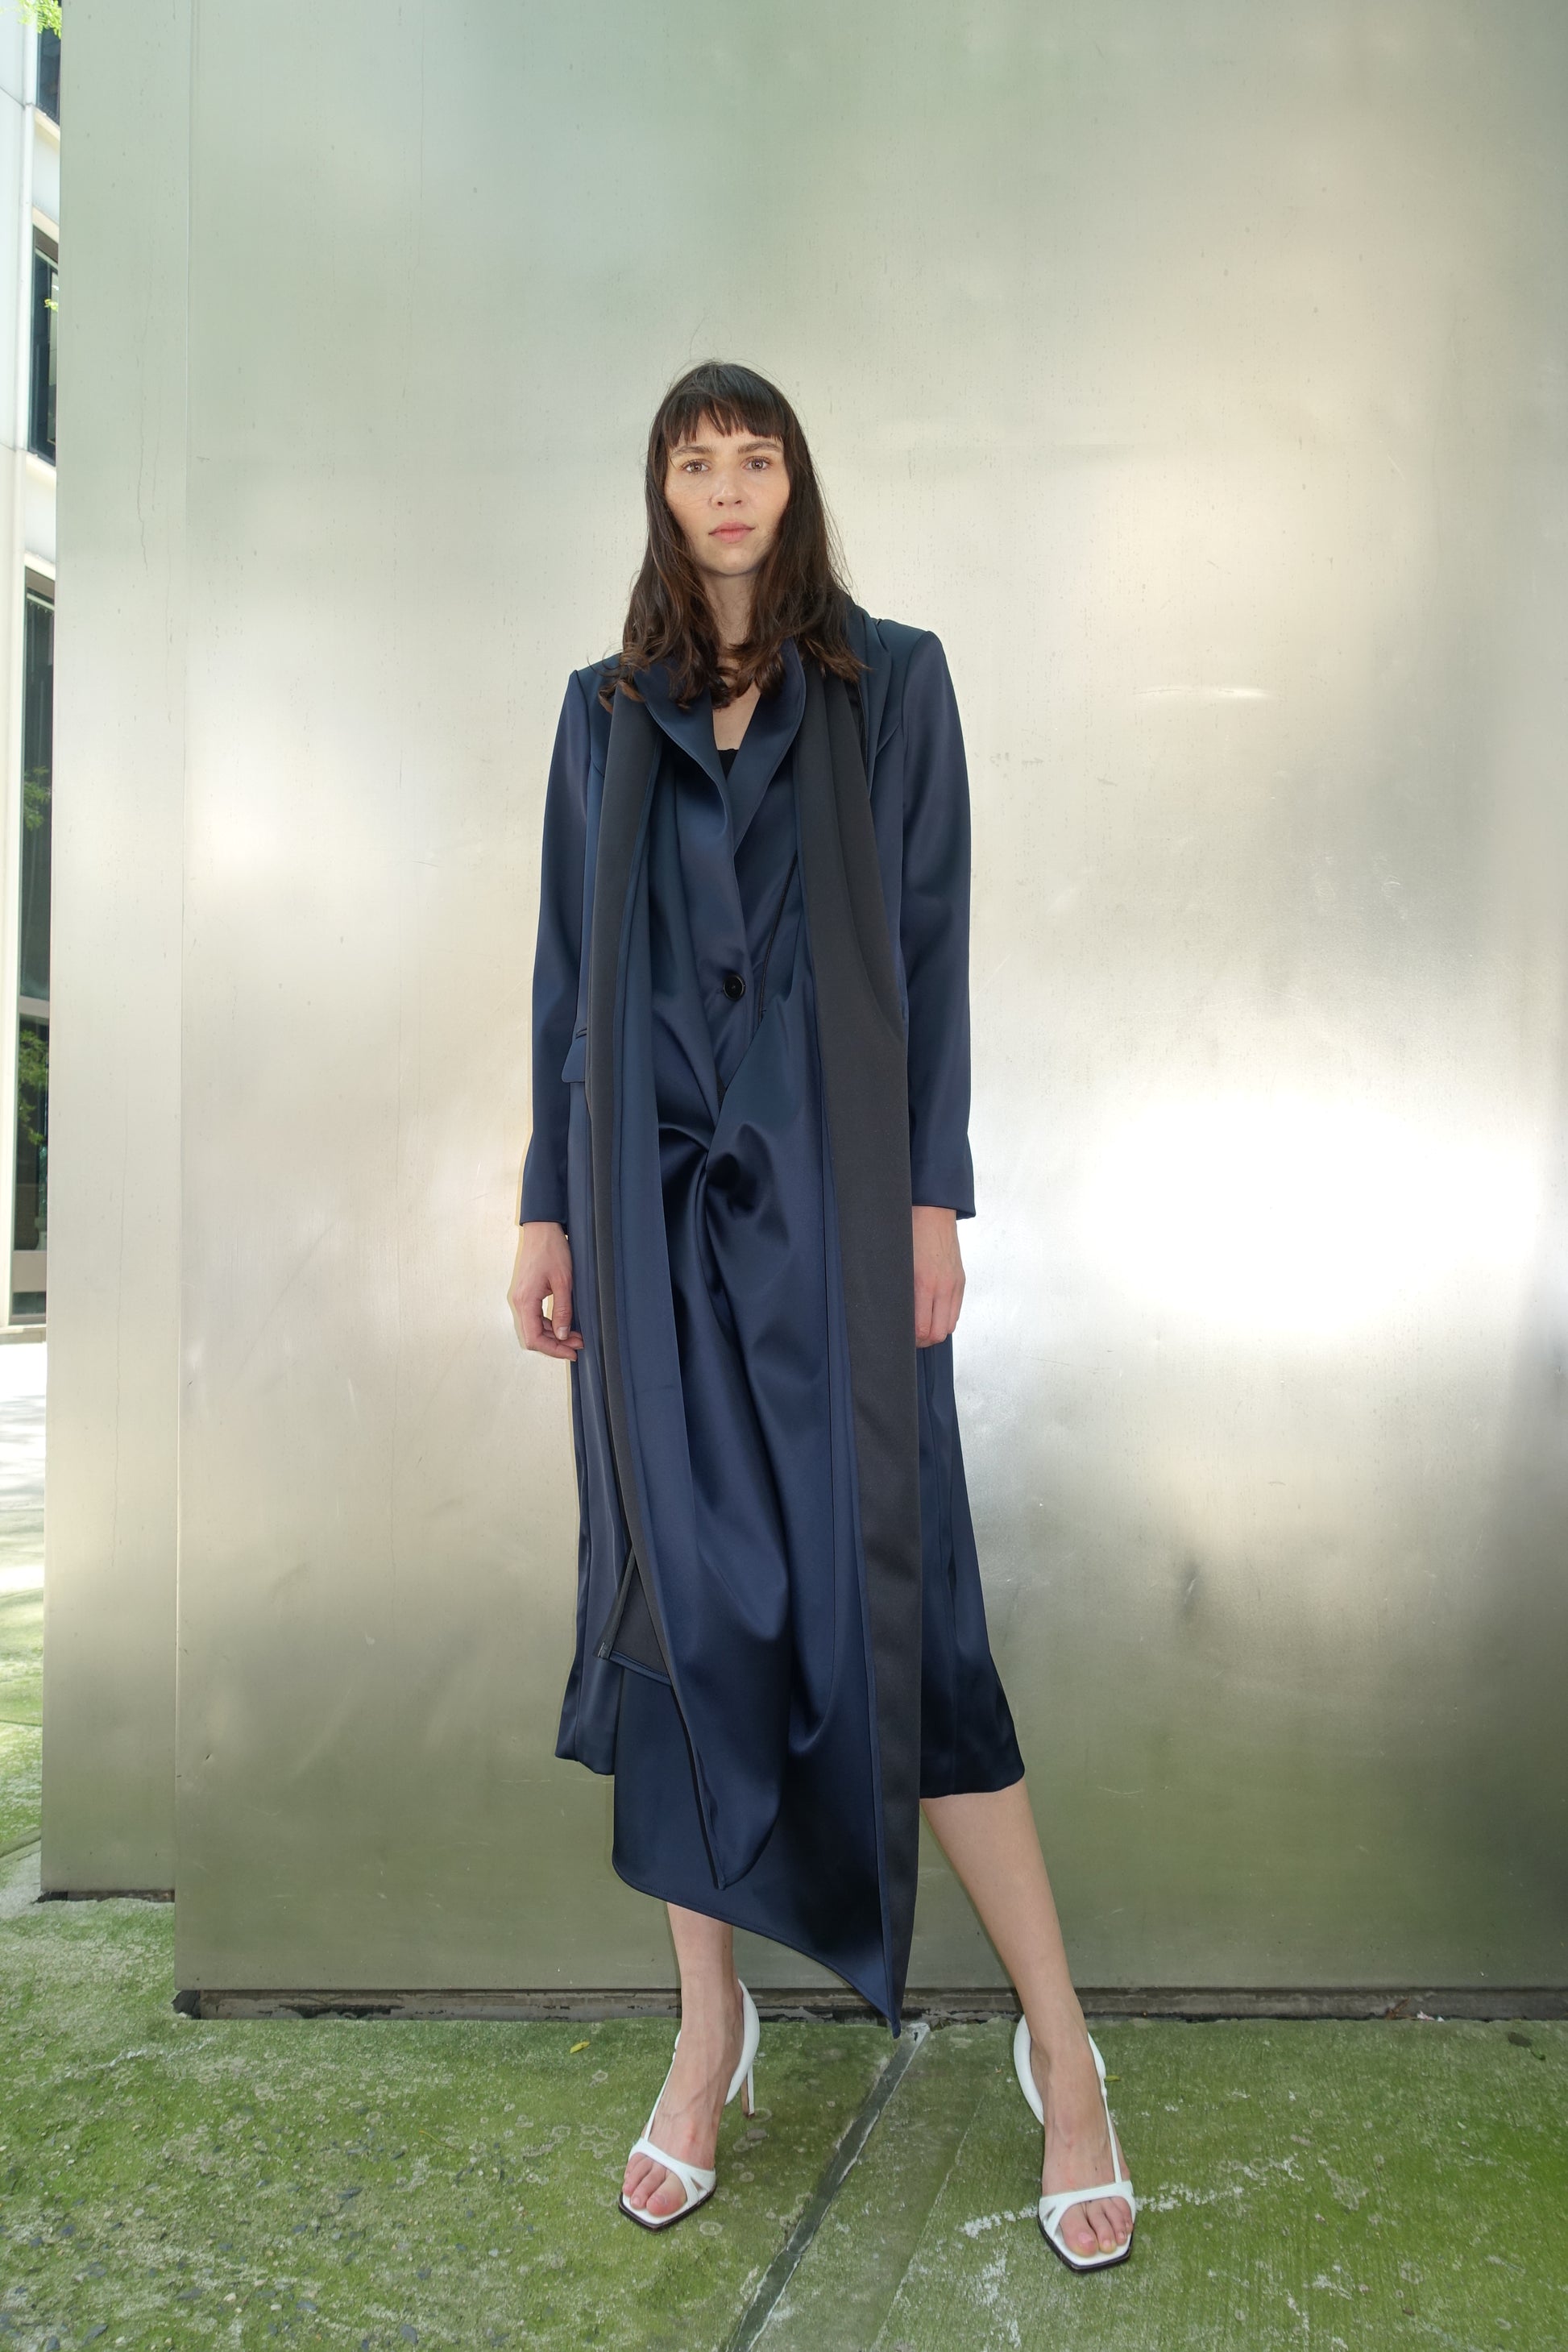 Woman wearing navy navy stretch satin coat with transformable zippers and self tie belt with draped detail over the front